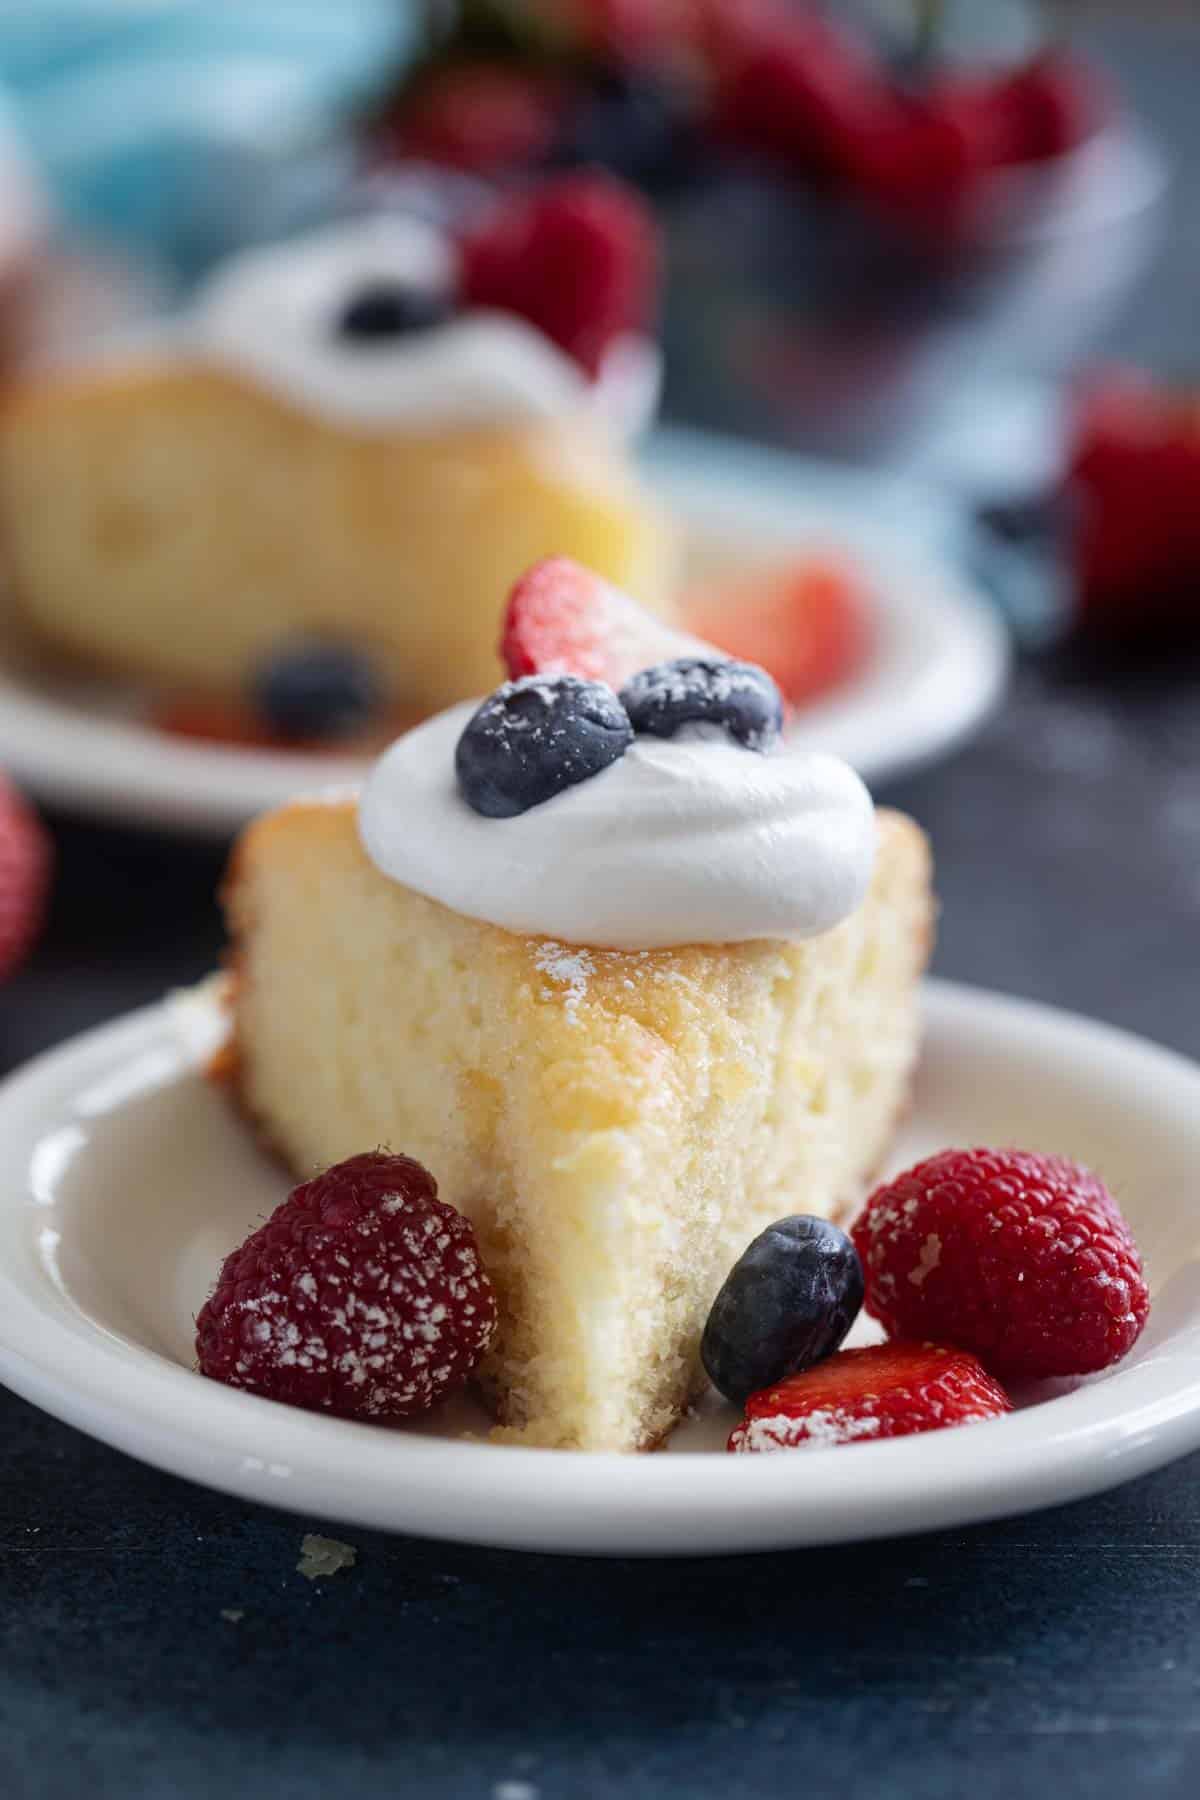 Slice of yogurt cake topped with whipped cream and berries.